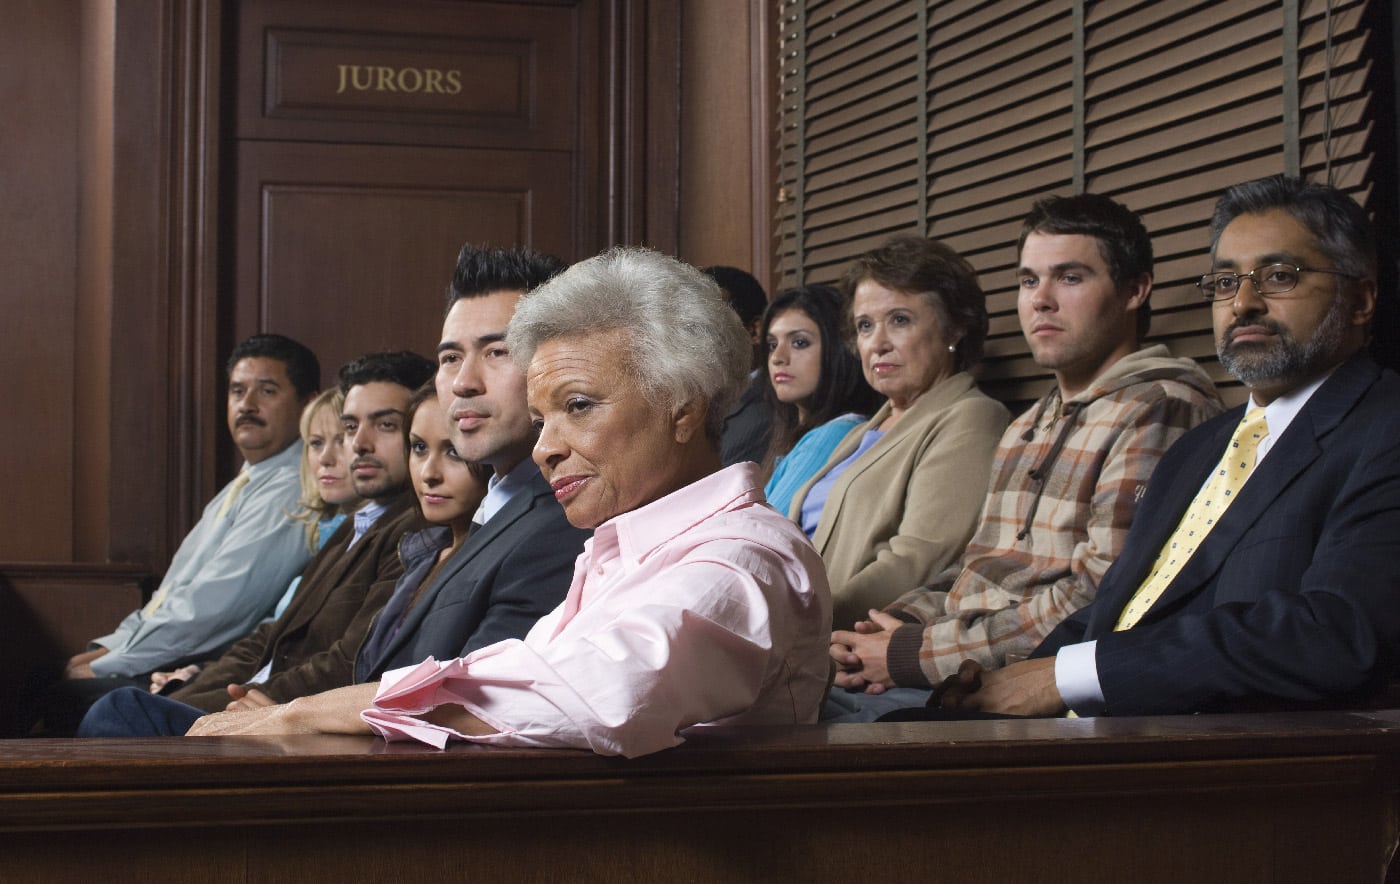 FAQ: FREQUENTLY ASKED QUESTIONS ABOUT JURY RESEARCH